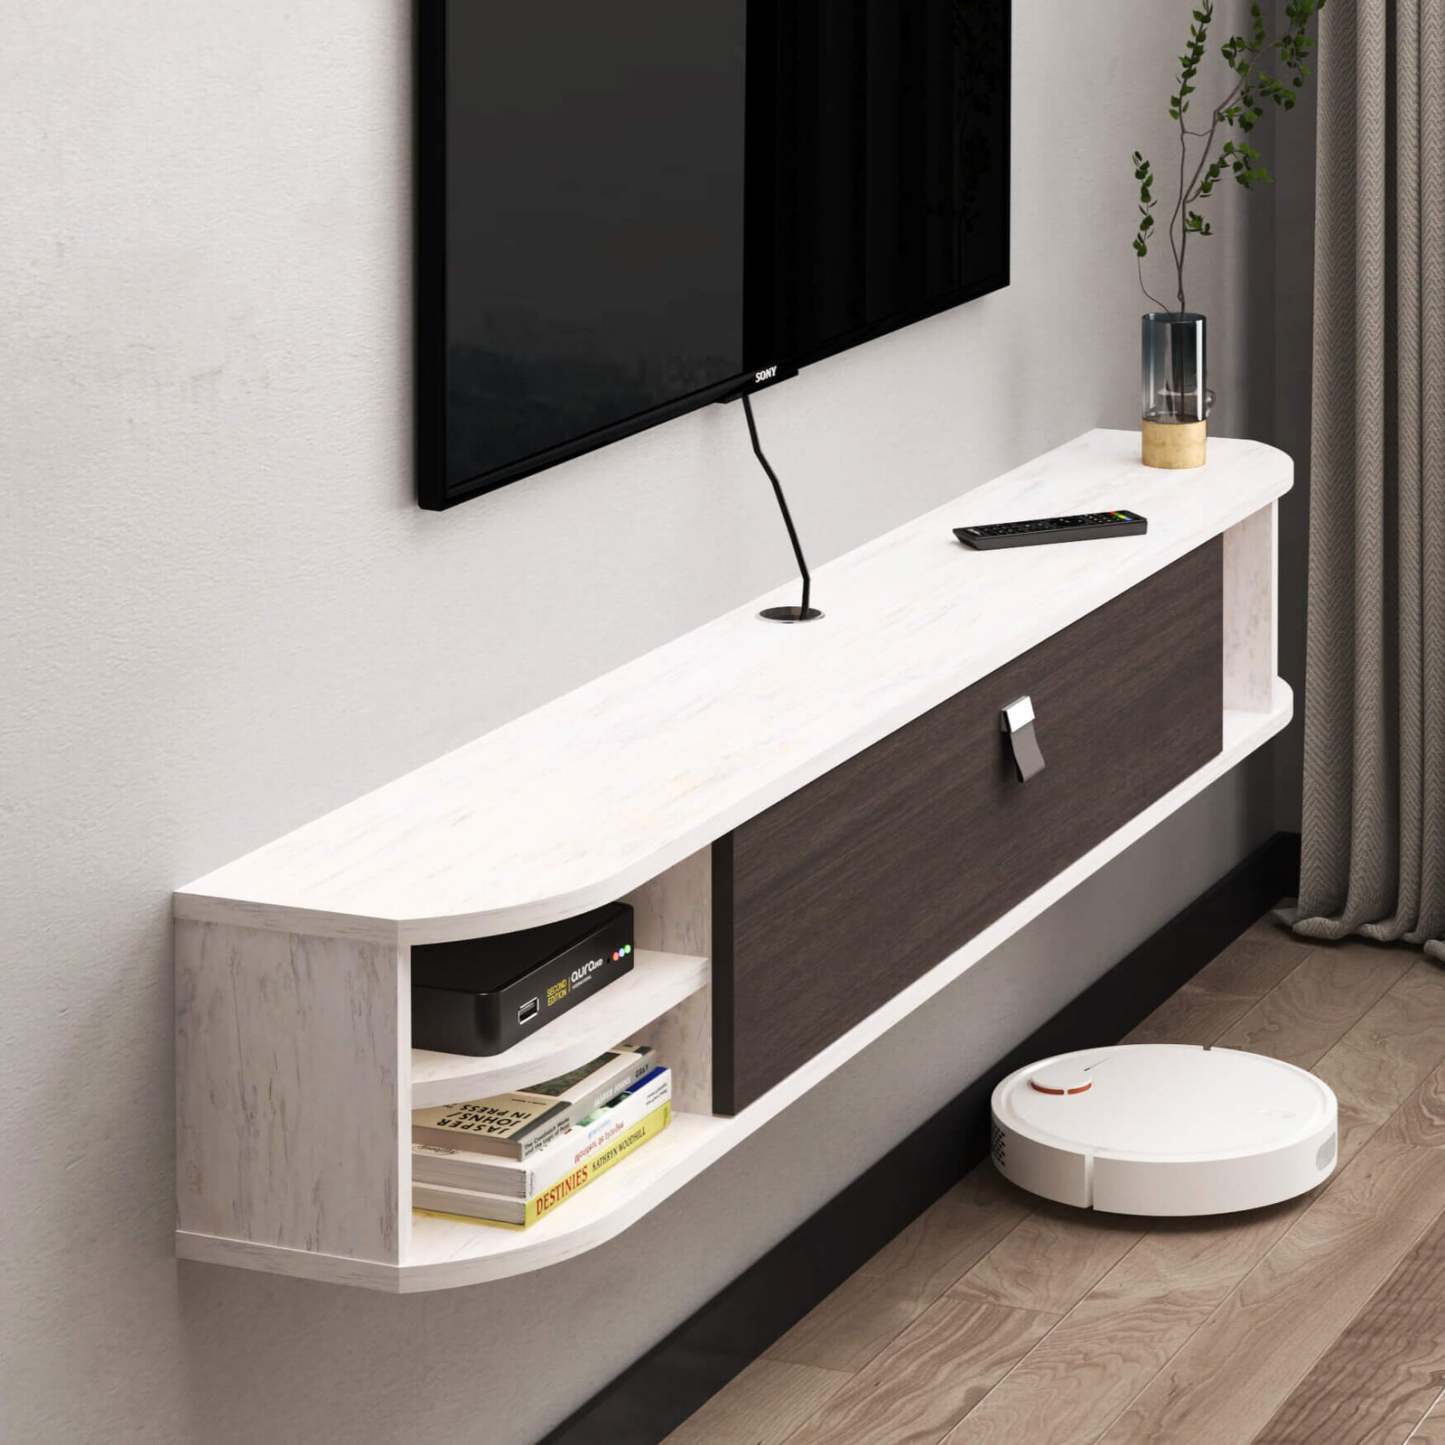 63.01" Off White Plywood Floating TV Stand Shelf with Storage Cubbies for 65" 70" Television